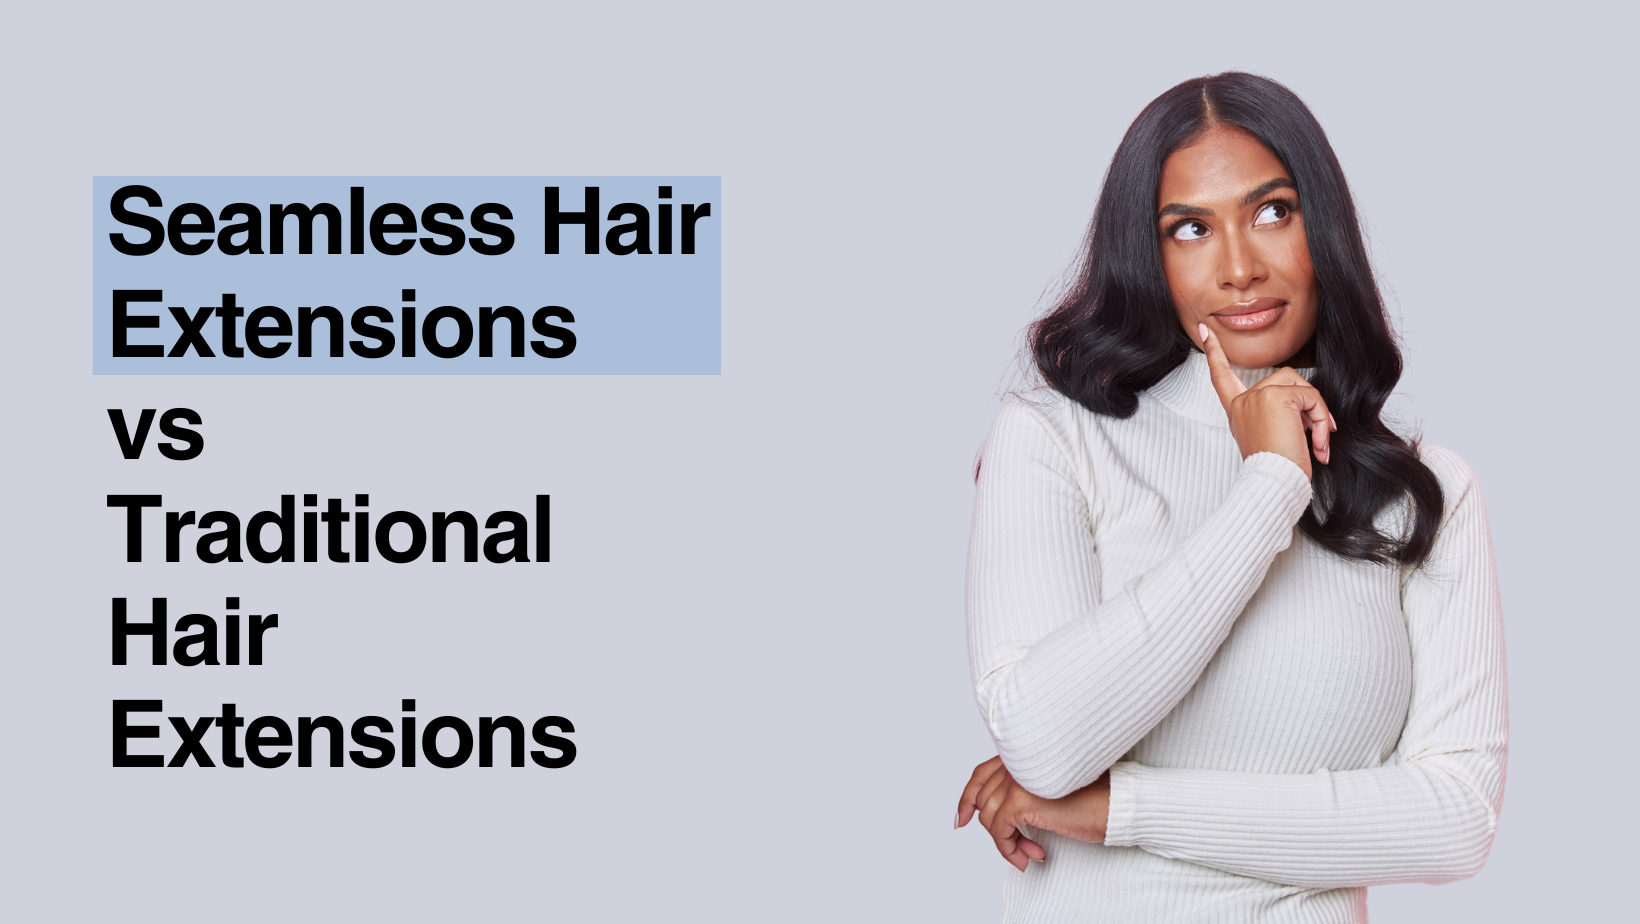 Seamless hair extensions vs traditional hair extensions